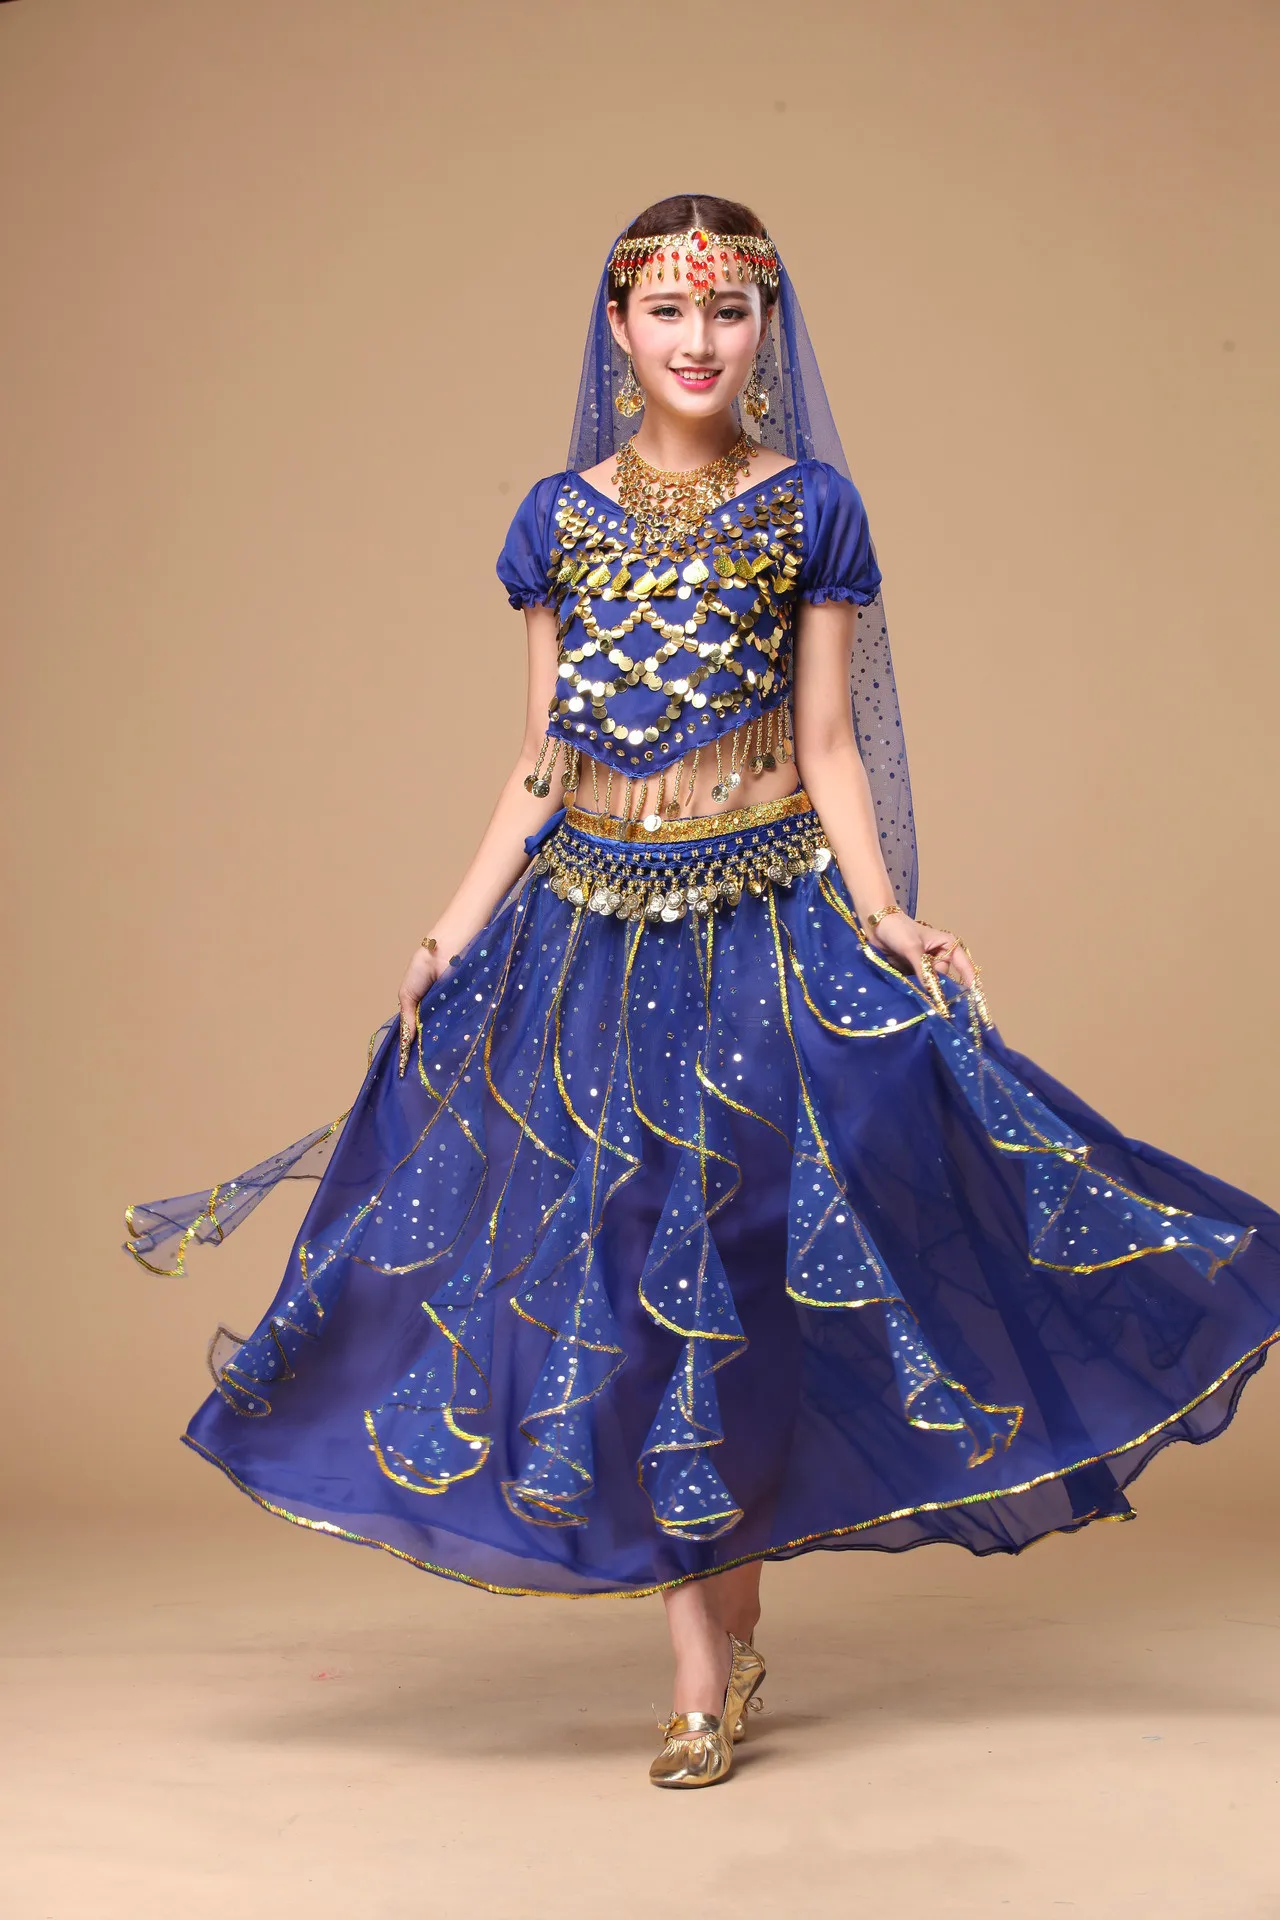 

Women Full Set Belly Dance Costume Lady Bellydance Wear for Competition Indian Dance Clothing Bollywood Dance Costumes 89